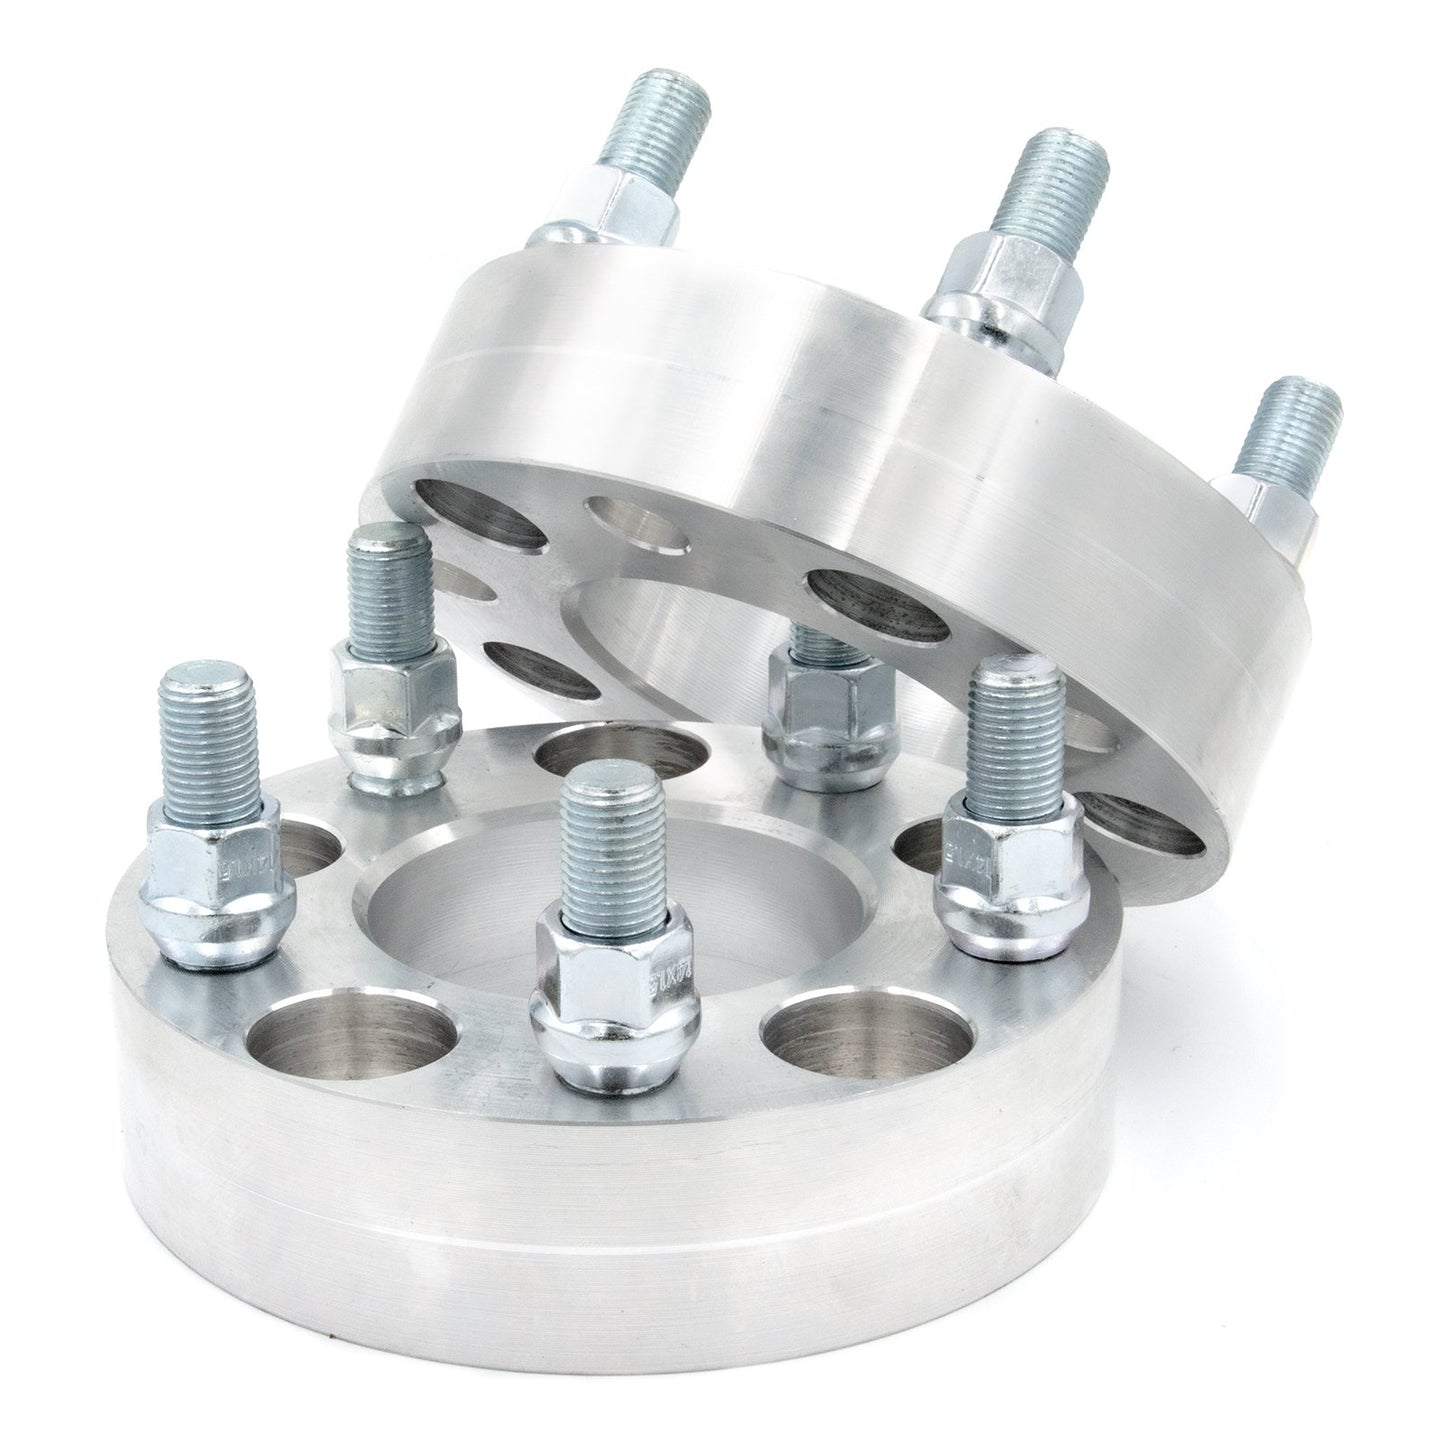 5x150 to 5x120 Wheel Spacer/Adapter - Thickness: 3/4"- 4"